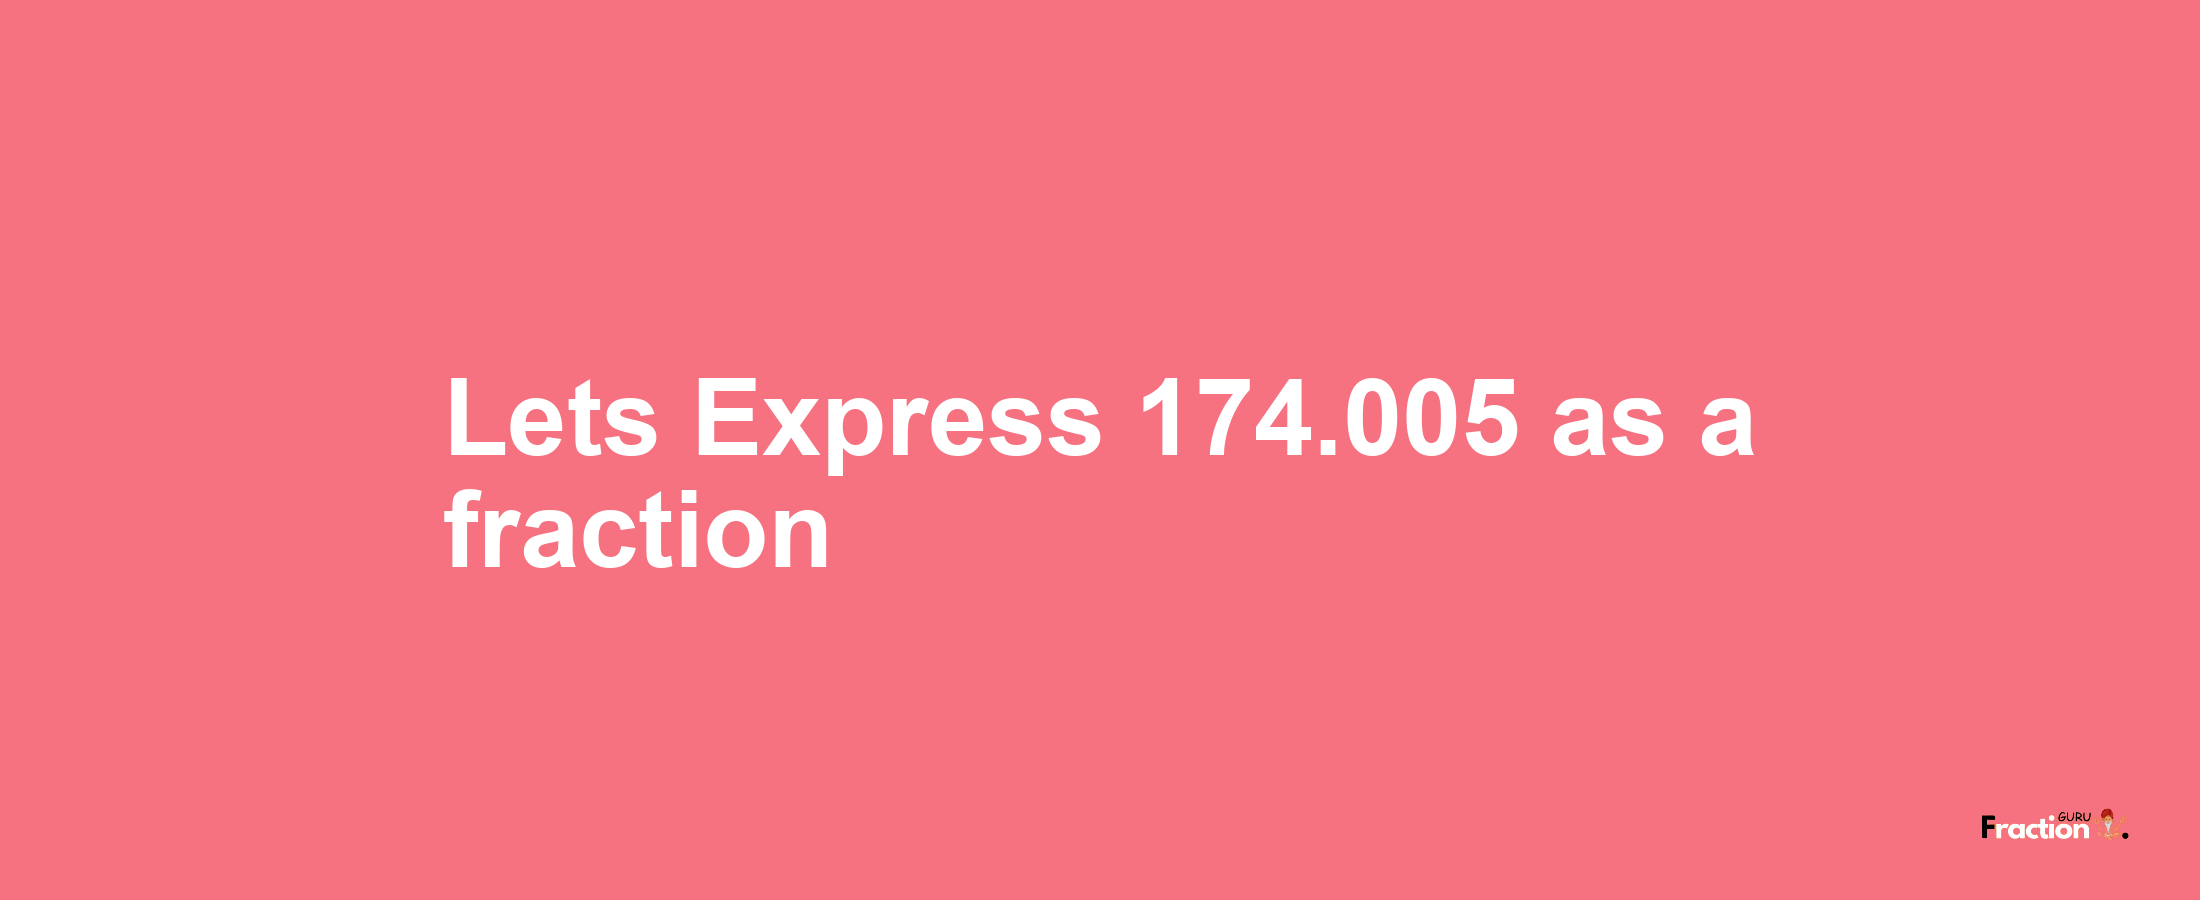 Lets Express 174.005 as afraction